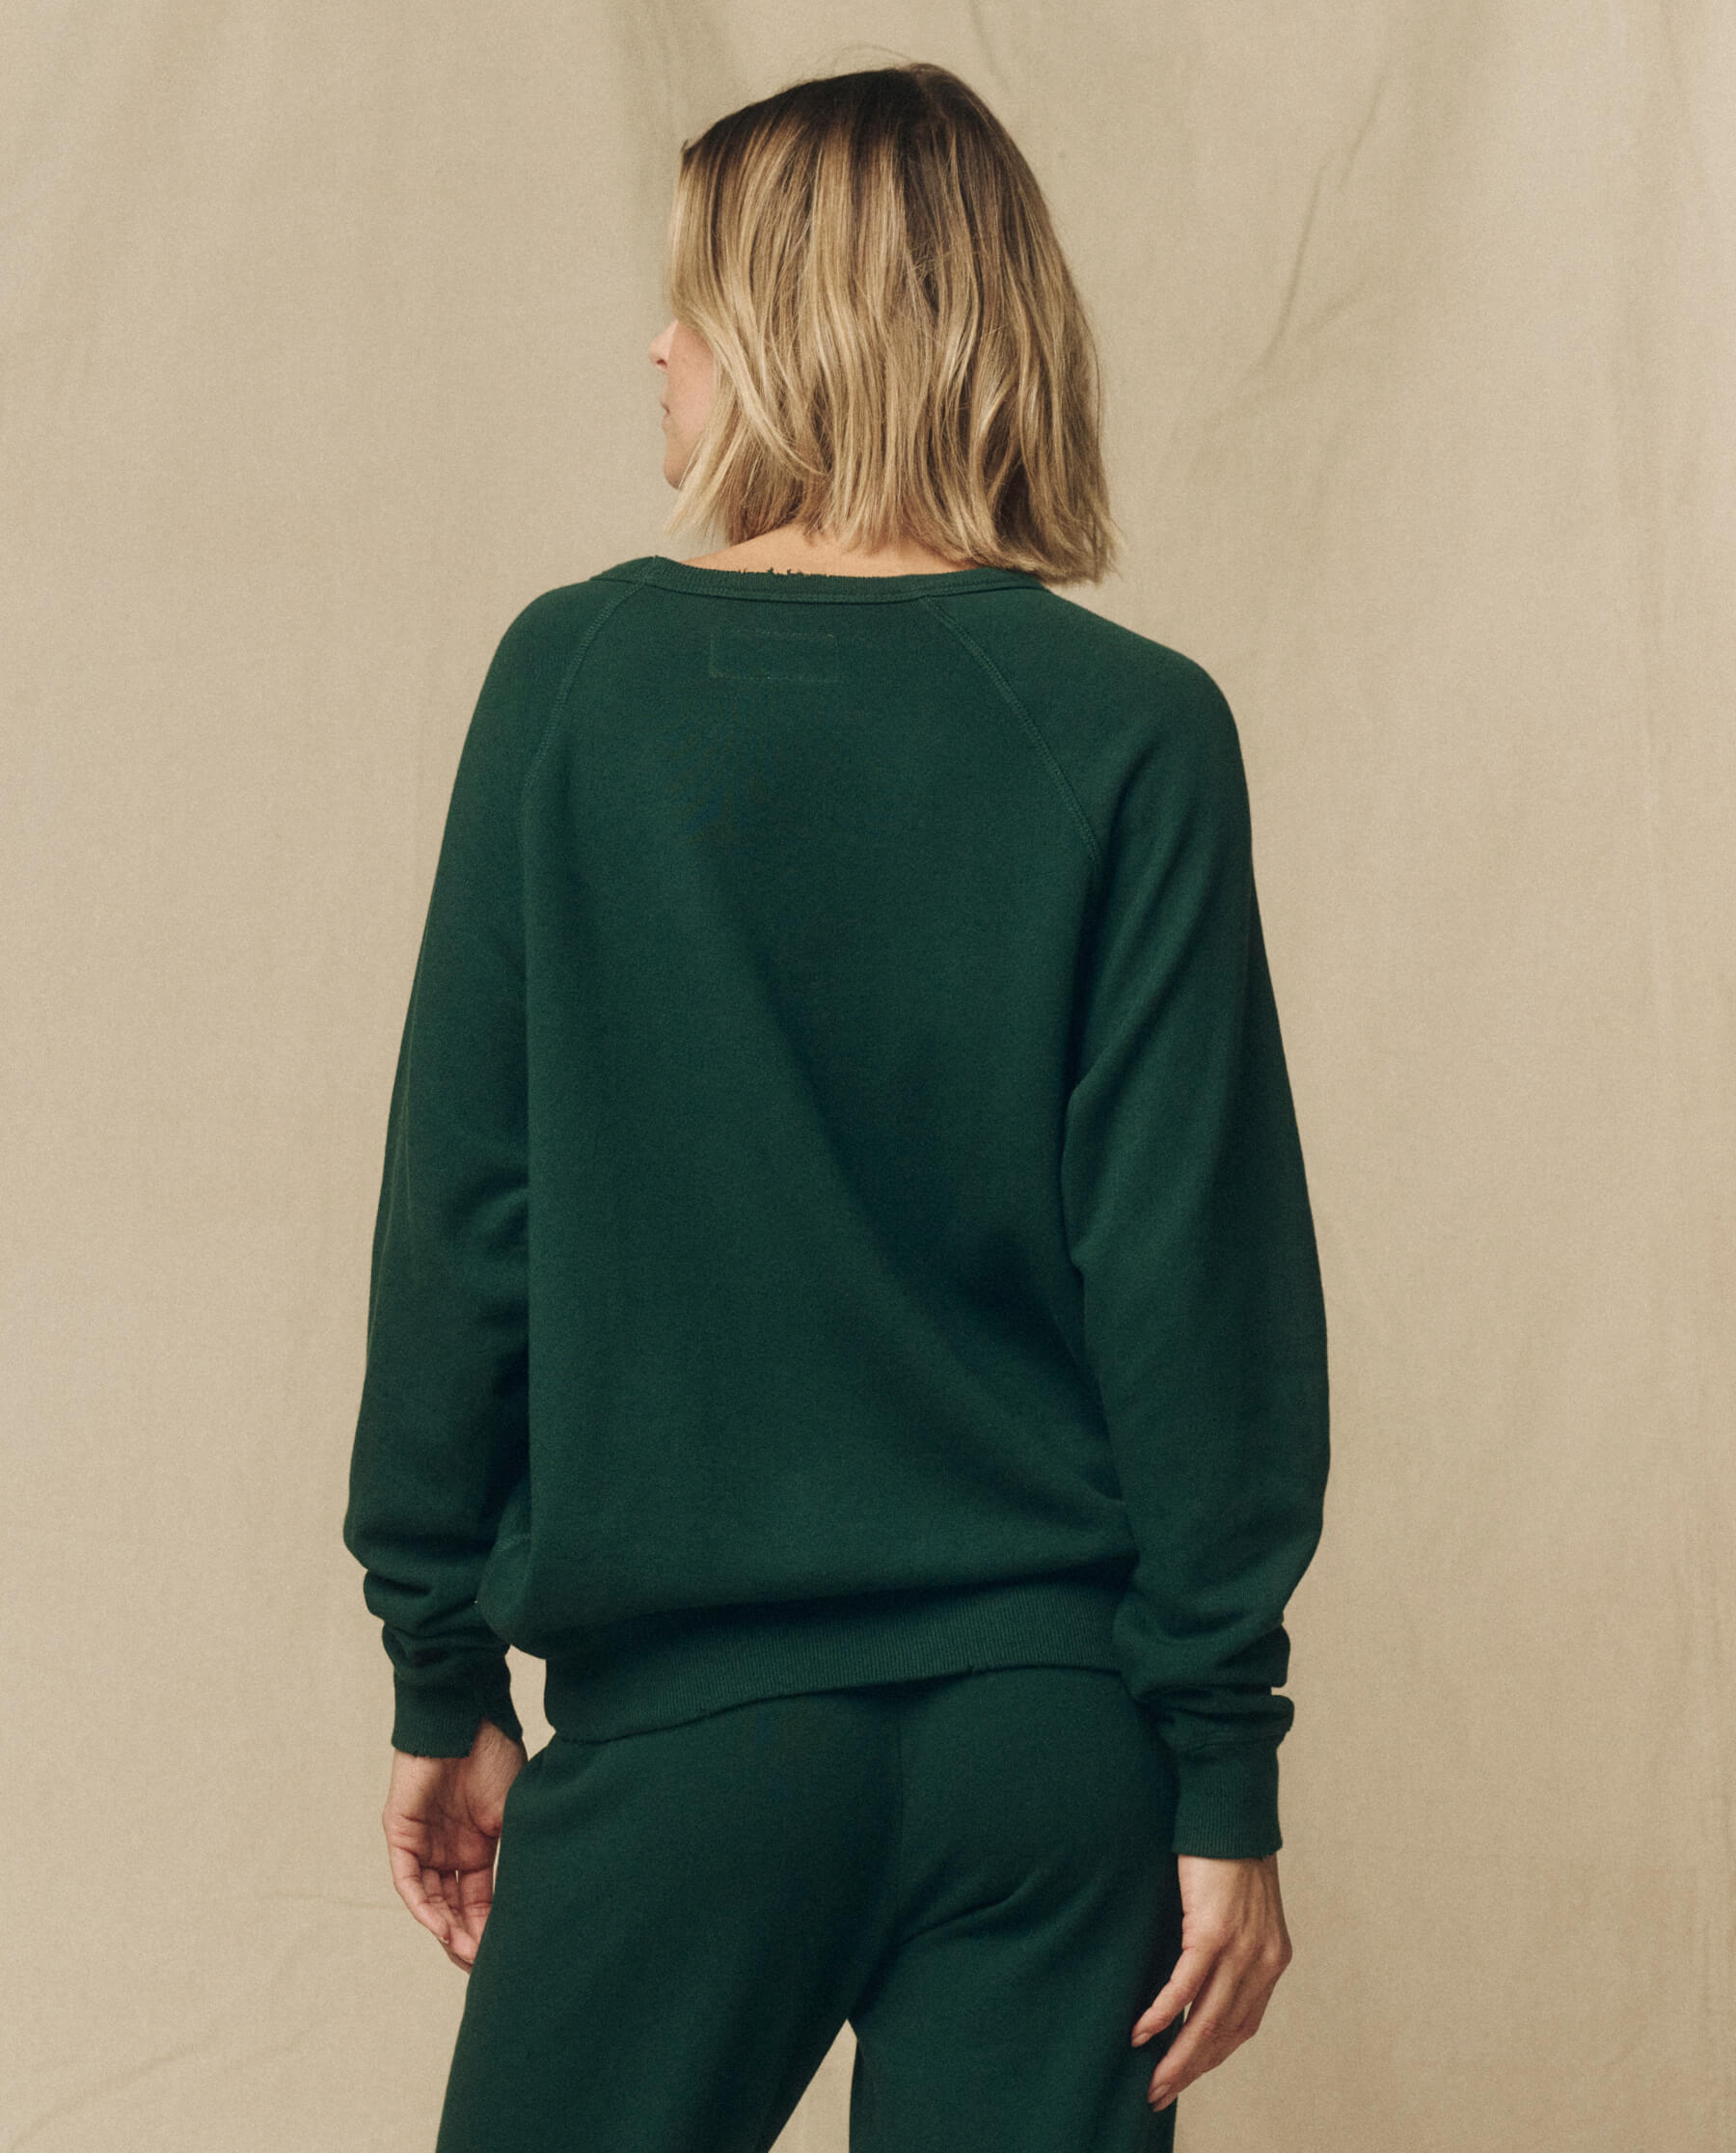 The College Sweatshirt. Solid -- Green Grove SWEATSHIRTS THE GREAT. FALL 23 KNITS